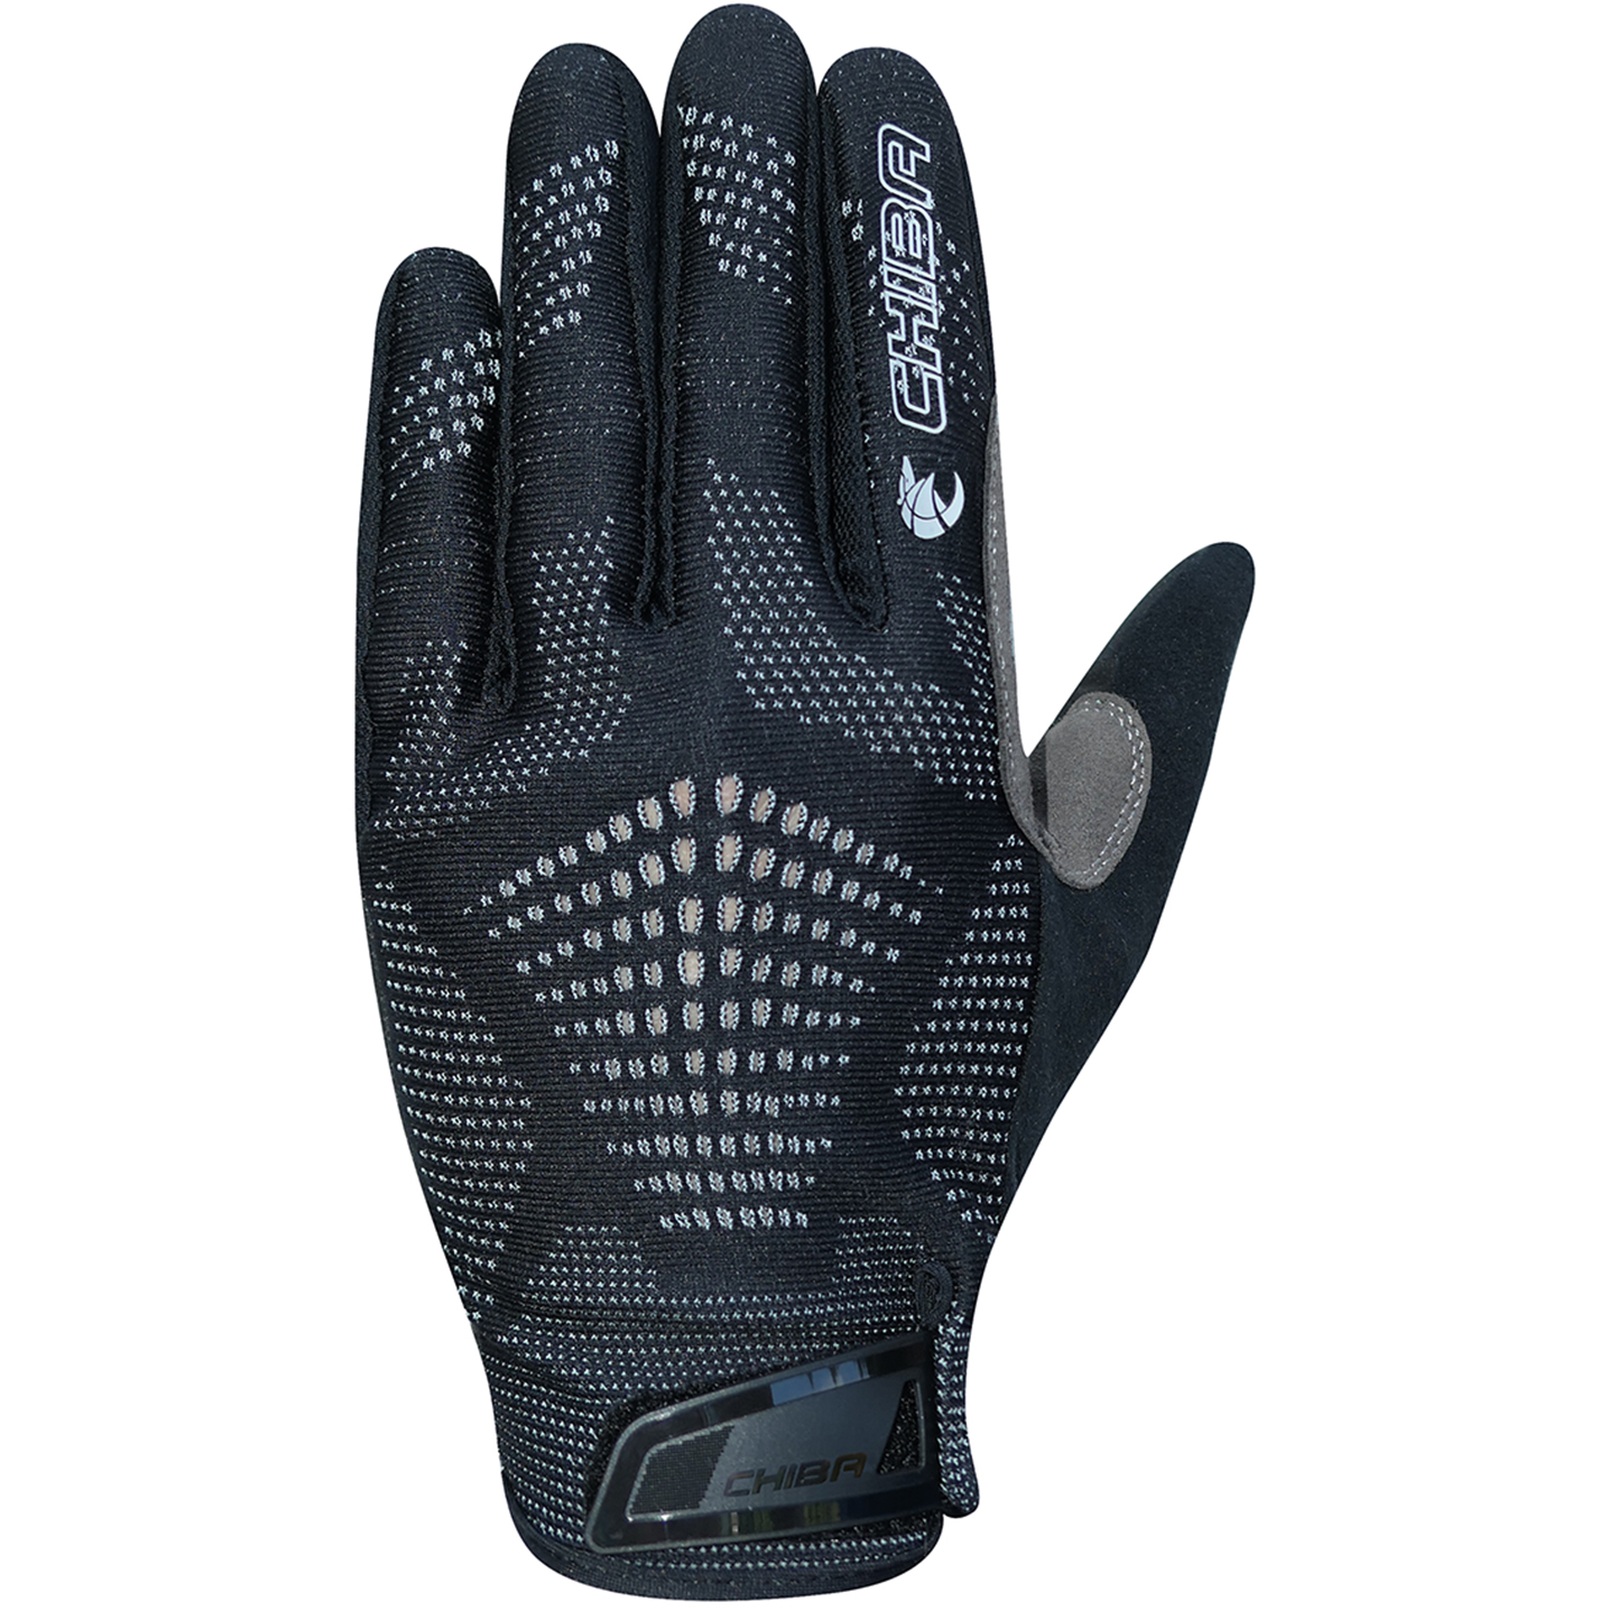 Picture of Chiba Gel Performer Cycling Gloves - black/black